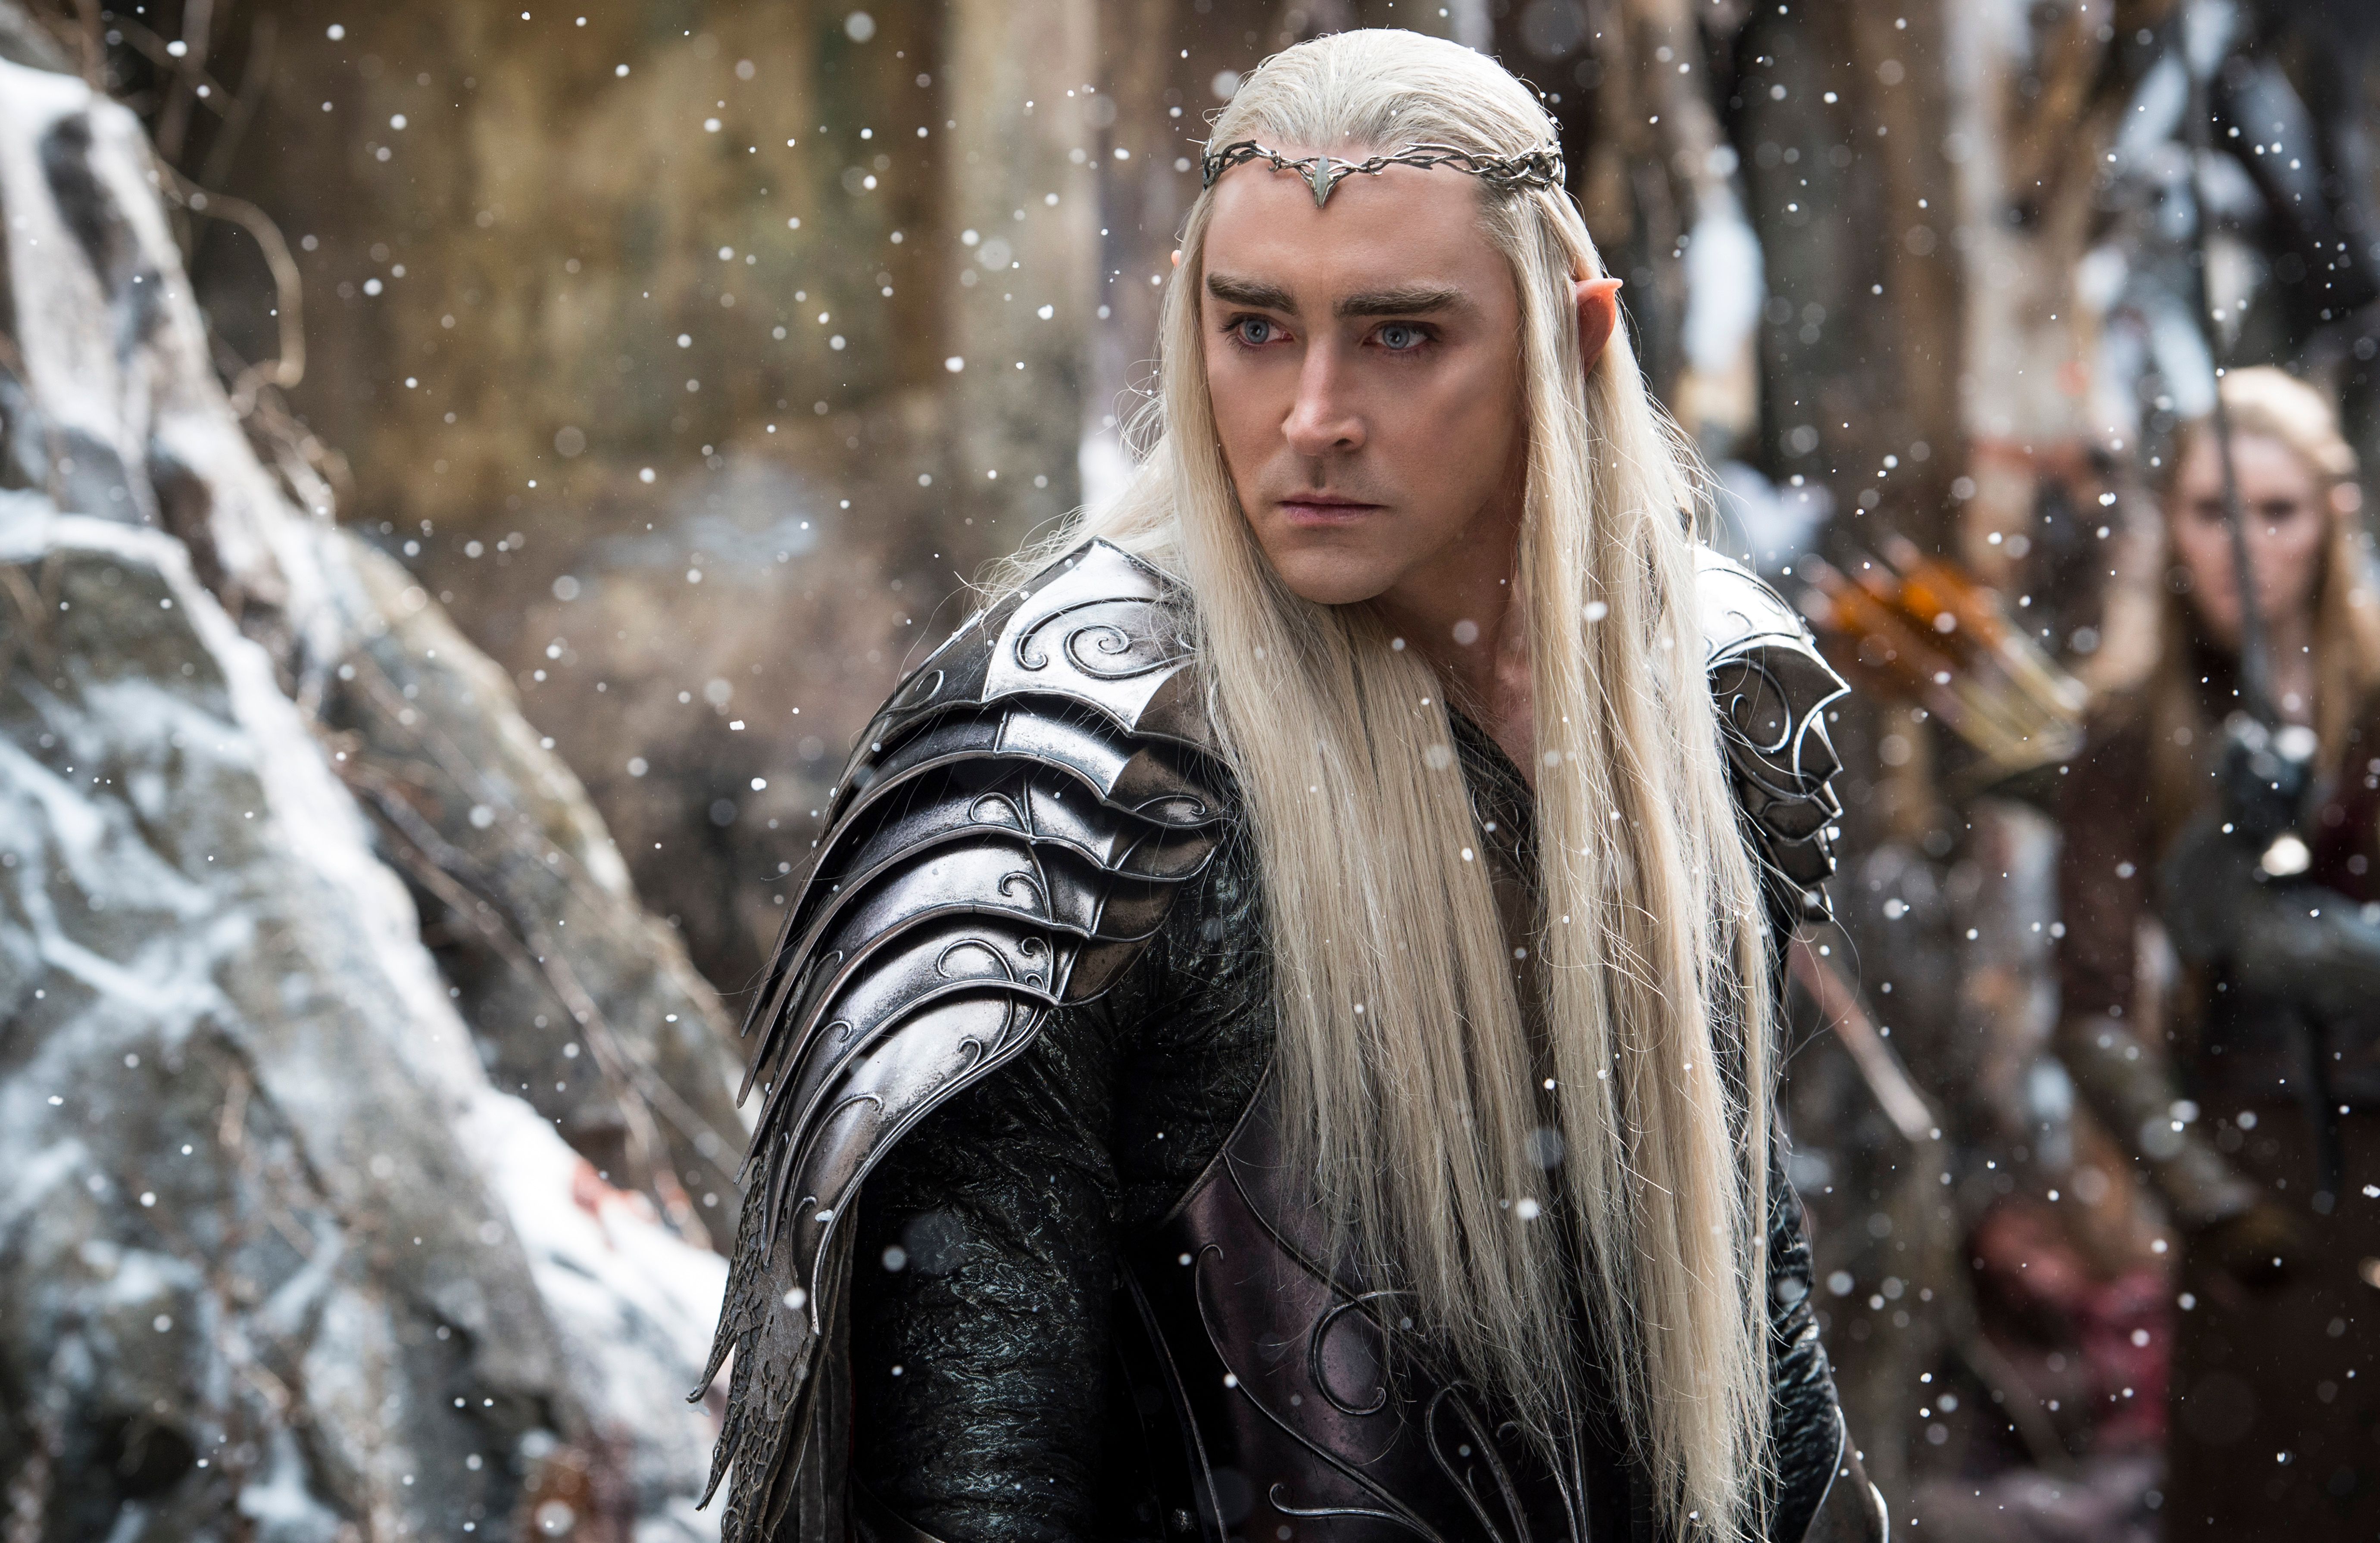 The Hobbit: The Battle of the Five Armies Photo 1